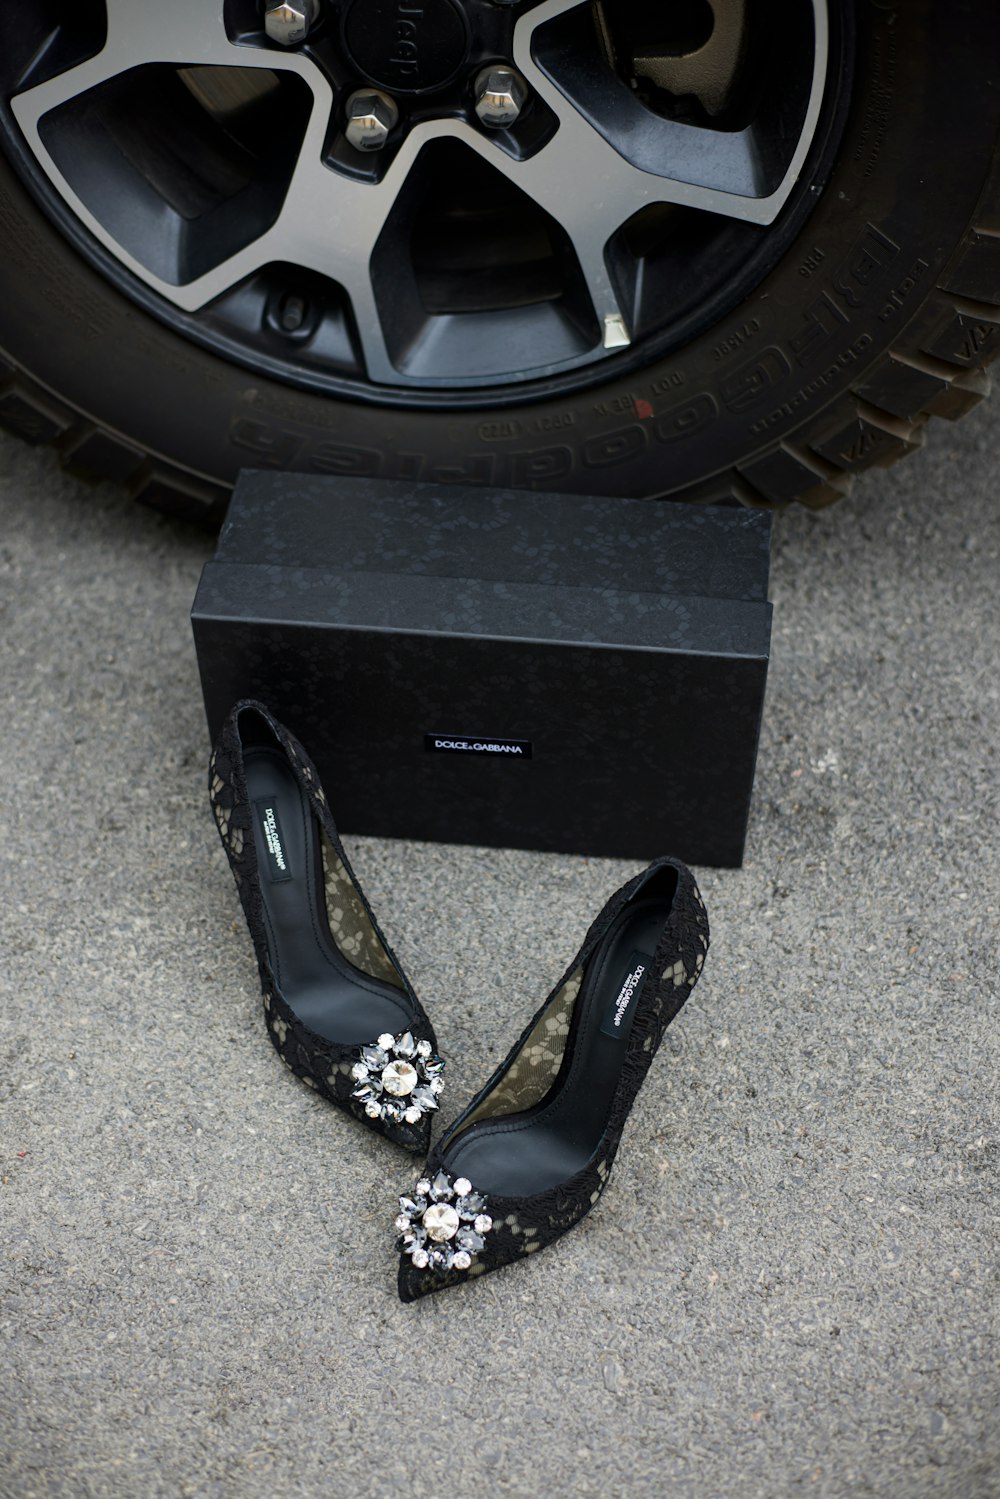 a pair of black high heeled shoes next to a black box